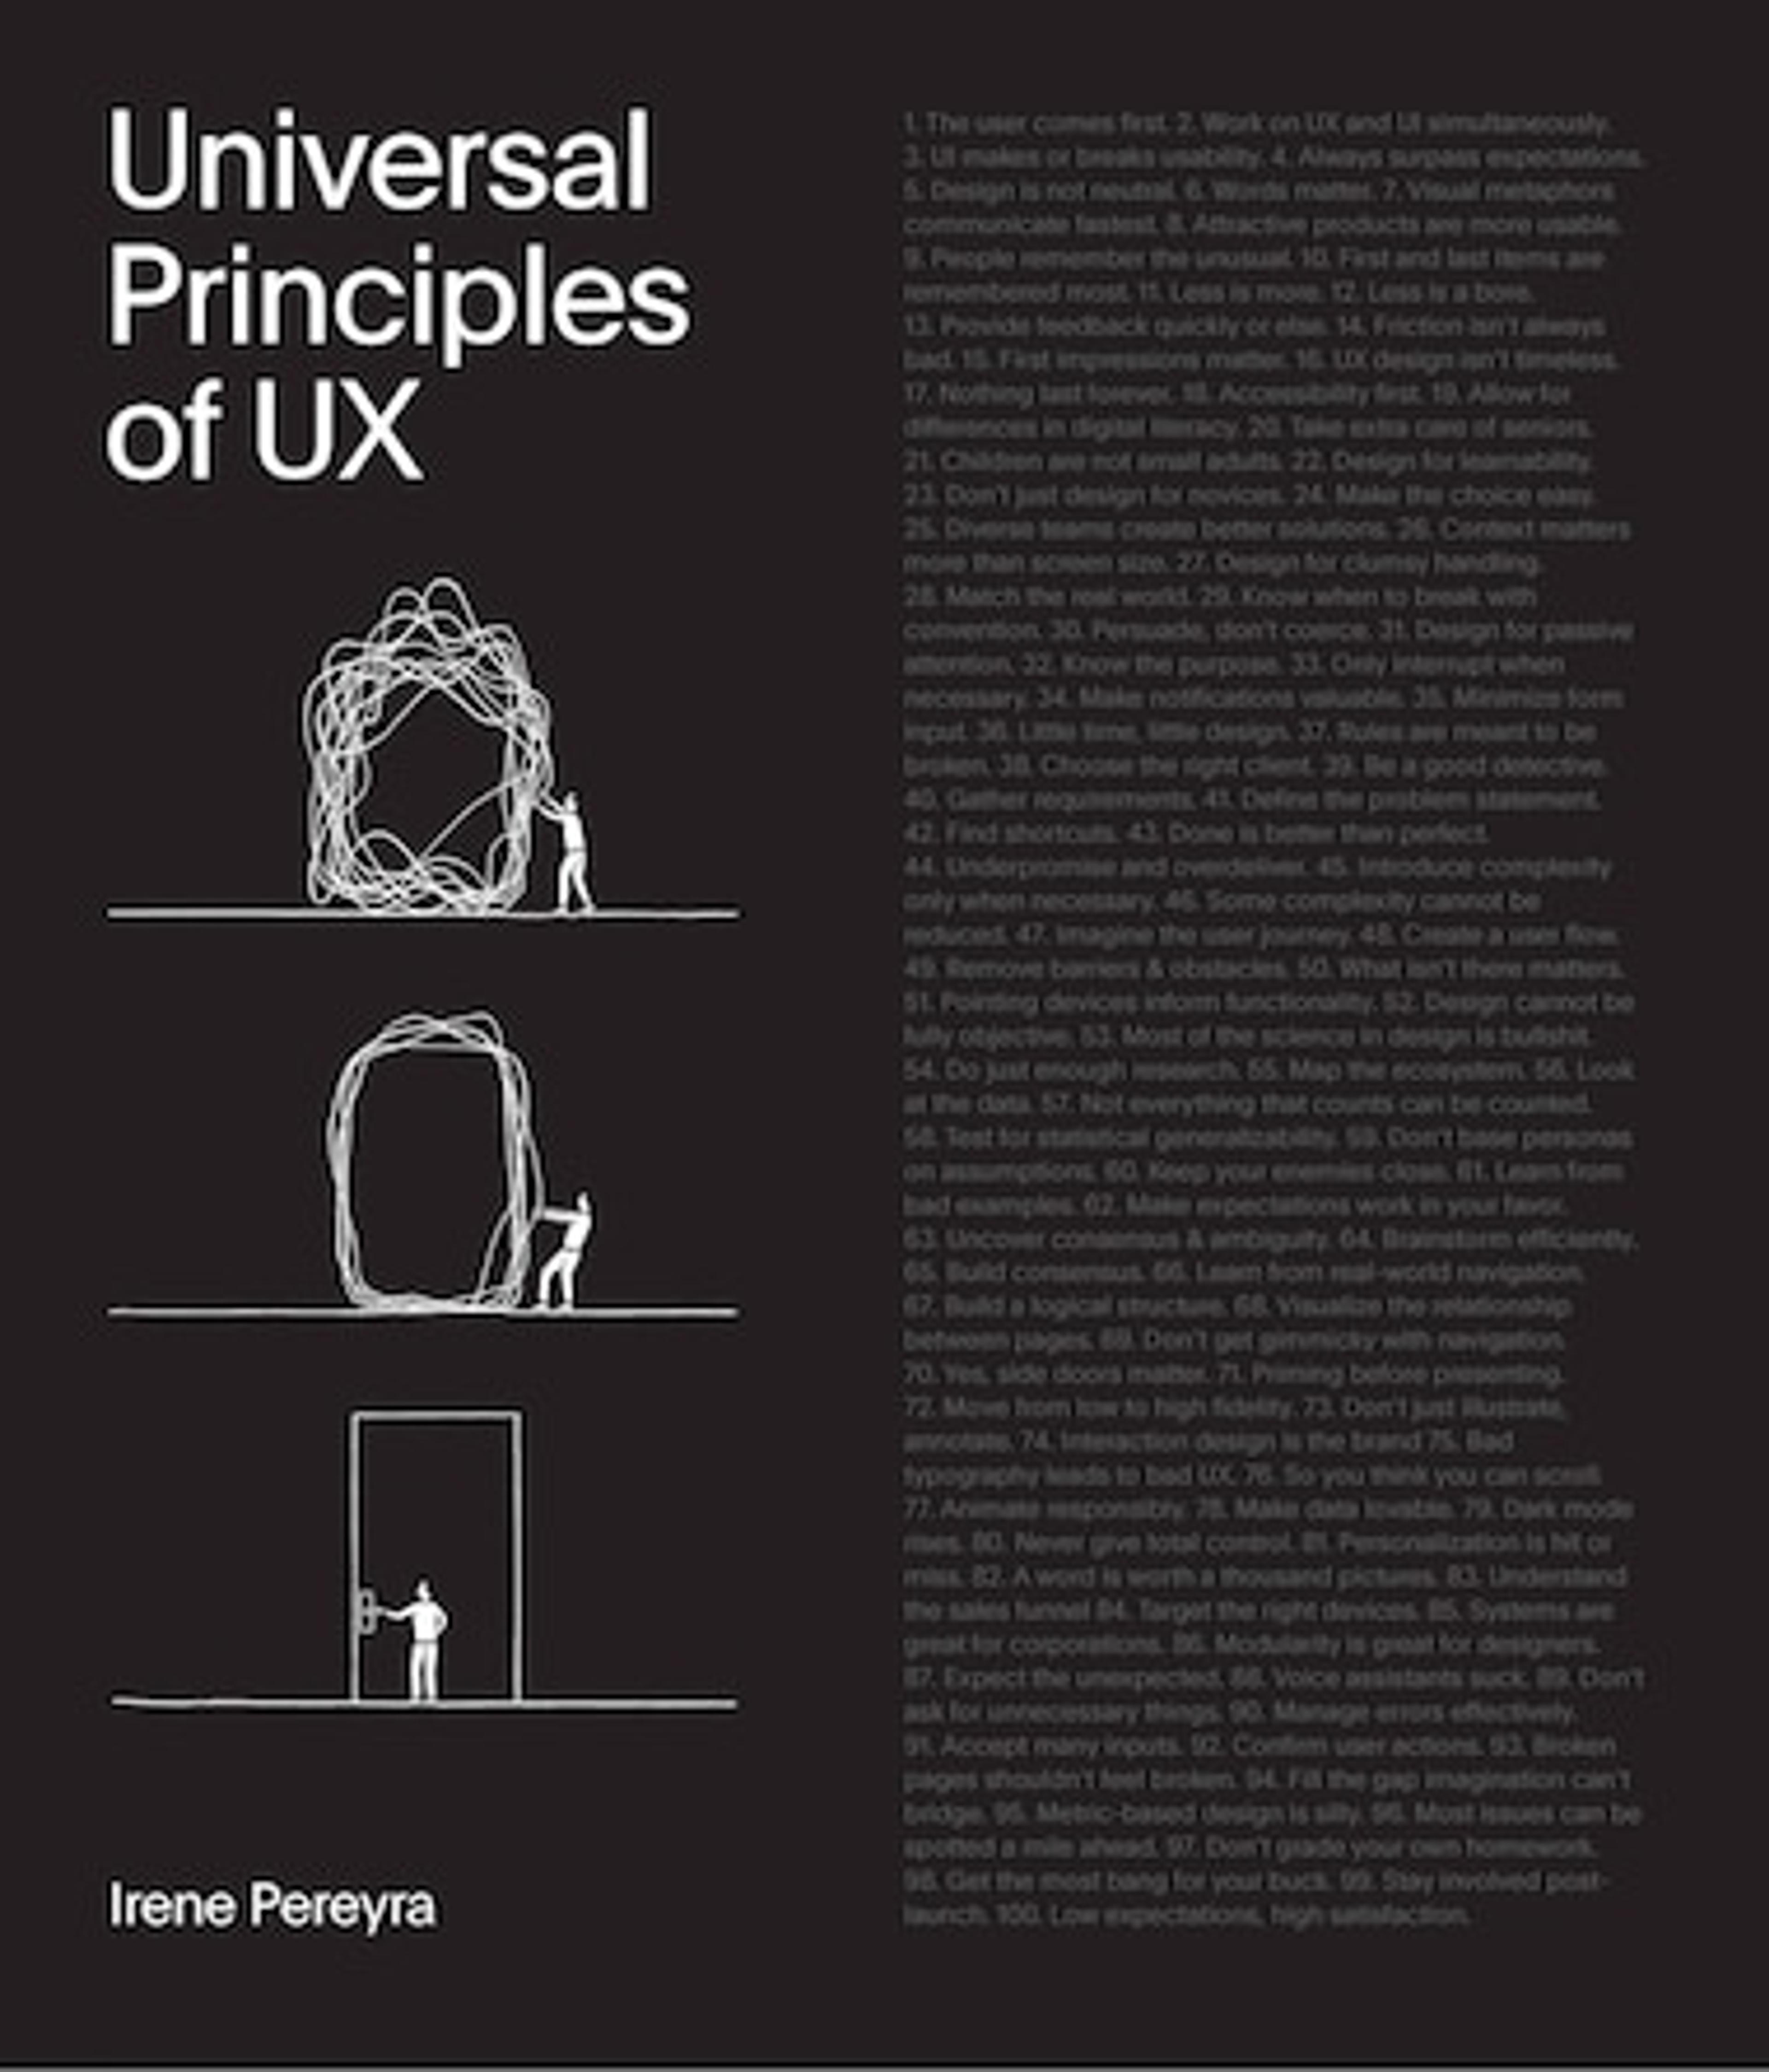 Universal Principles of UX: 100 Timeless Strategies to Create Positive Interactions between People ..., Book by Irene Pereyra (Hardcover) | www.chapters.indigo.ca